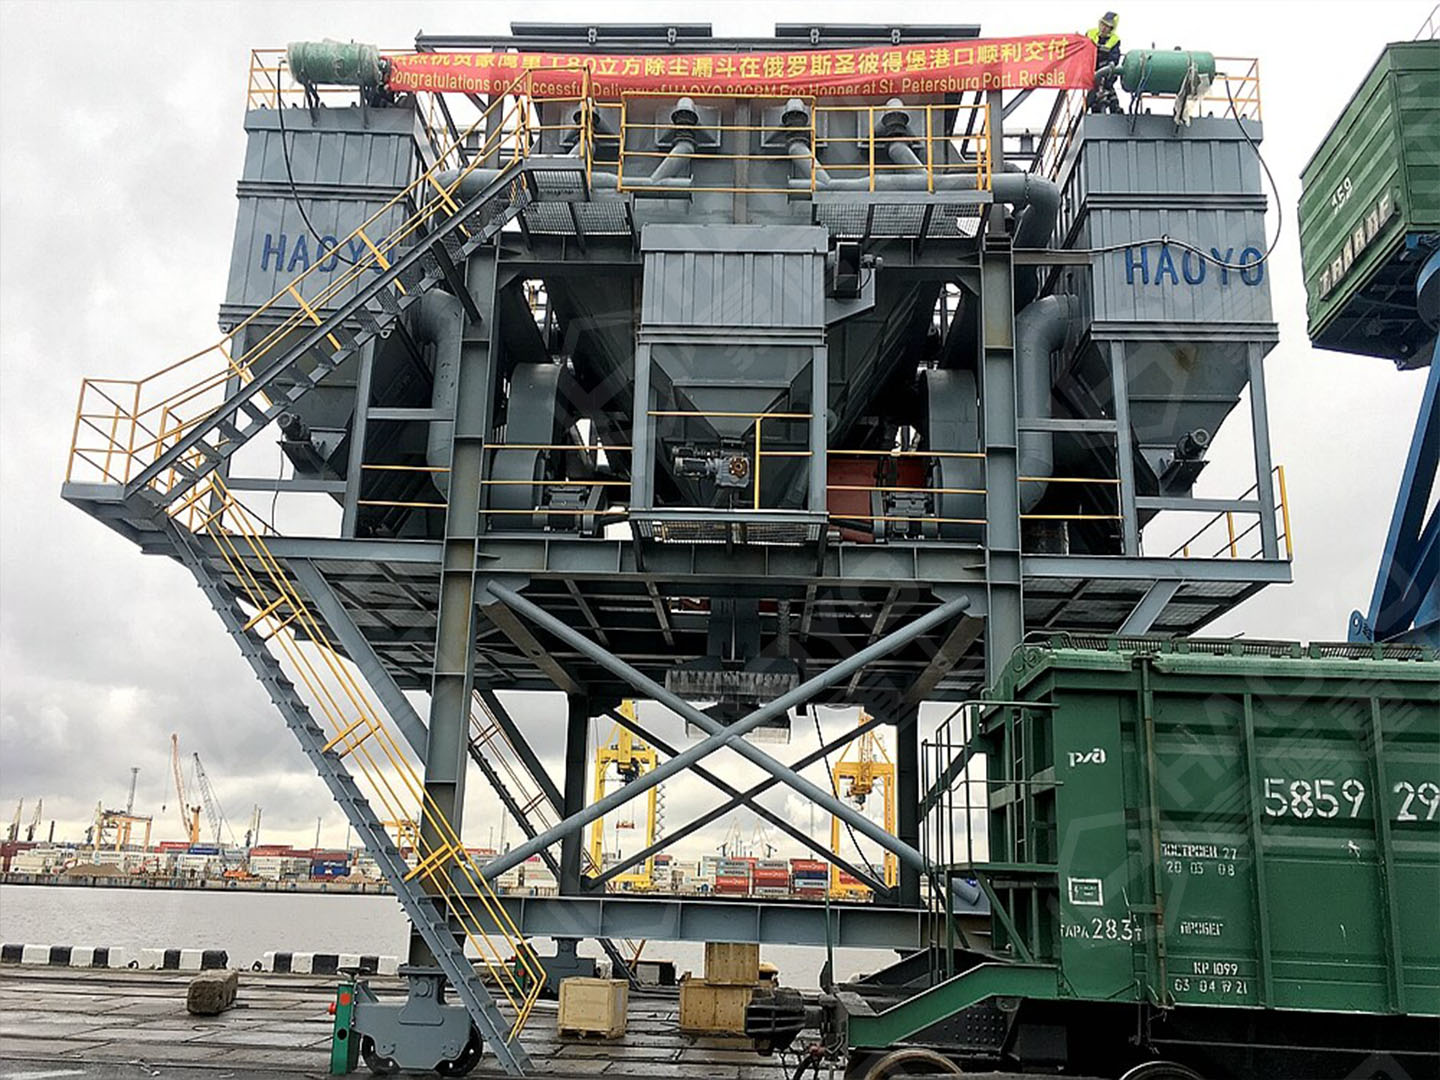 HAOYO 80m³ dedusting port hopper wassuccessfully delivered in the port of st. Petersburg, Russia